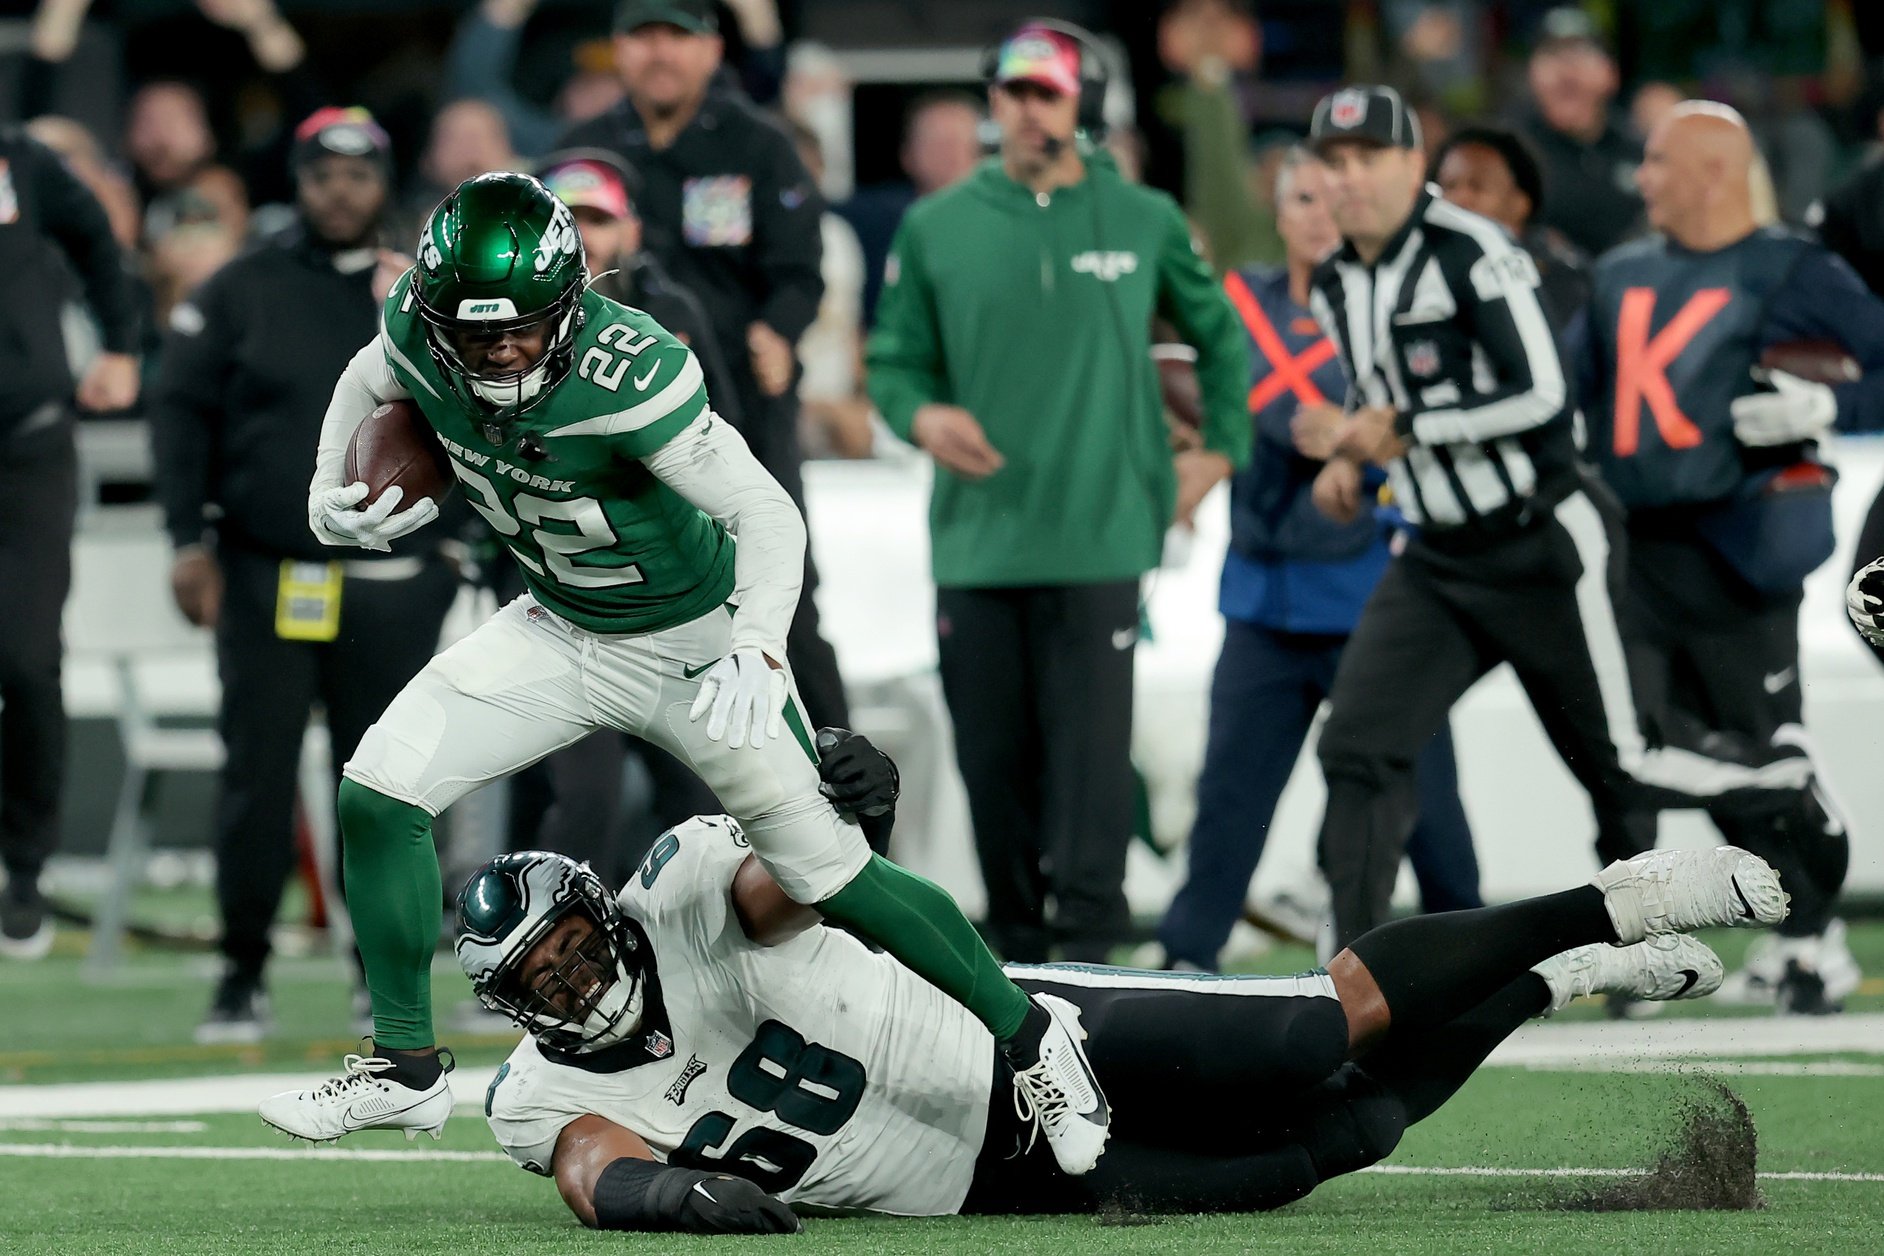 Jets score first win over Eagles in franchise history after